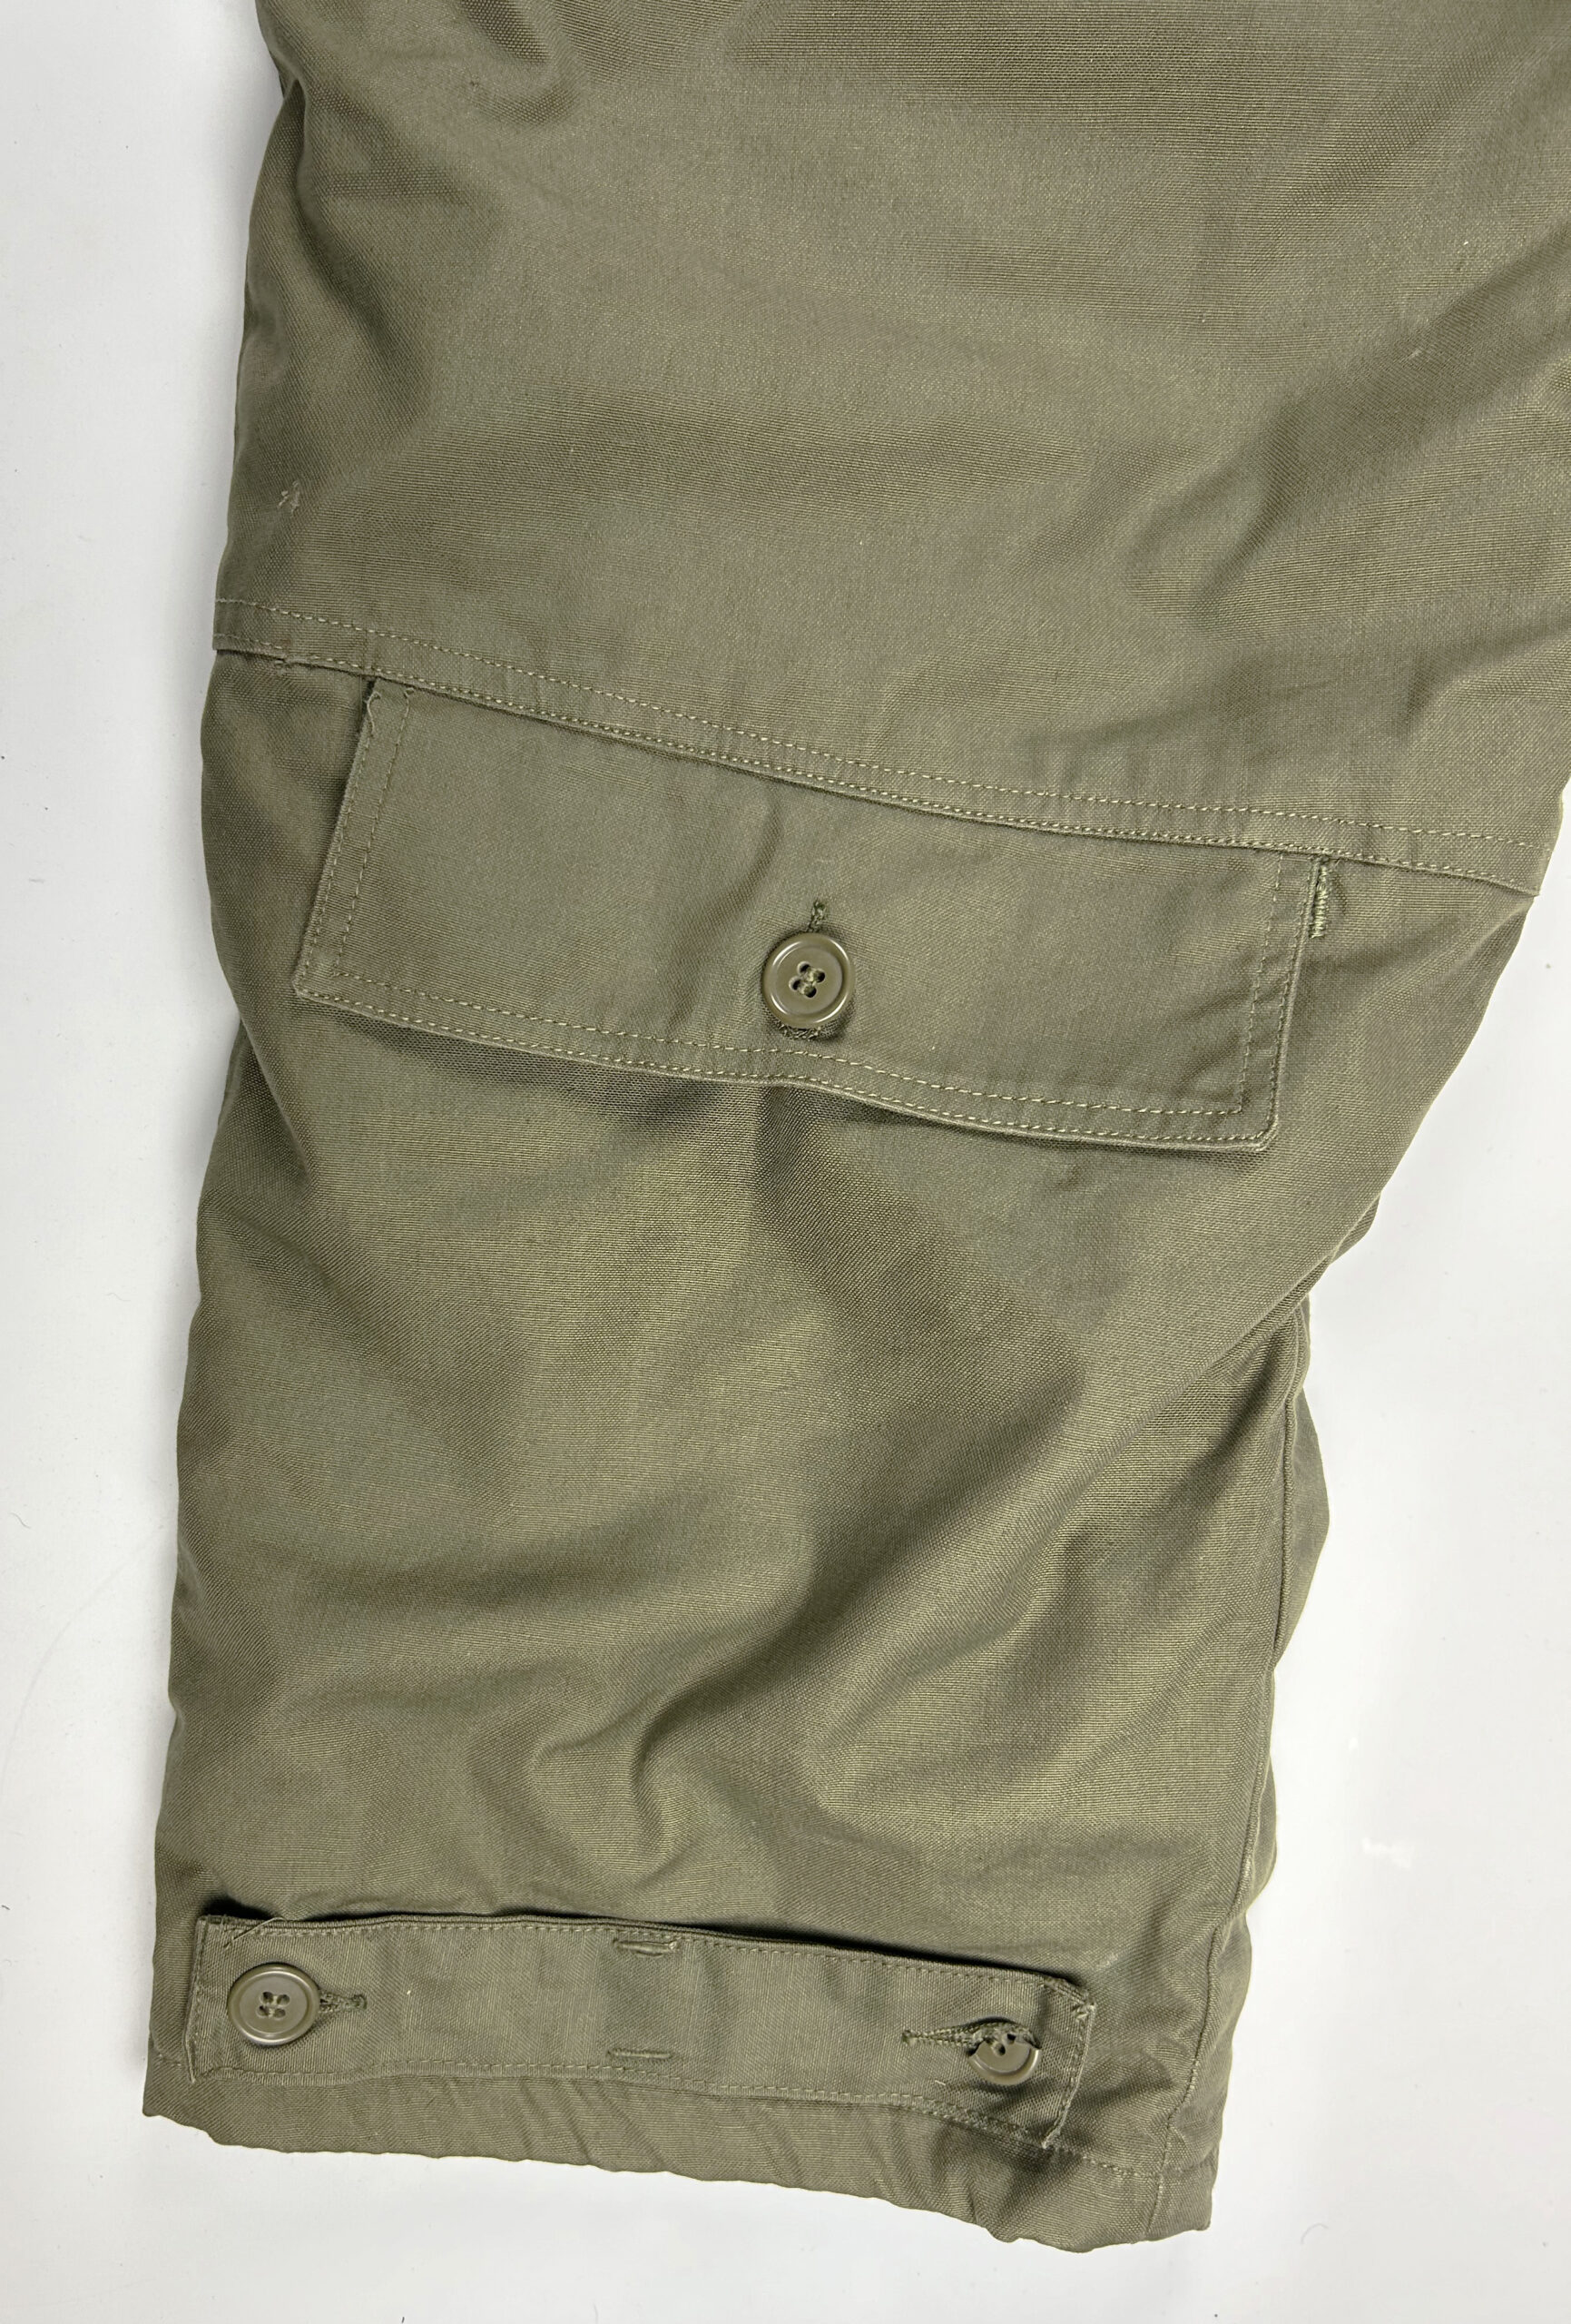 U.S Army Air Forces (USAAF) Type A-10 Winter Flight Pants